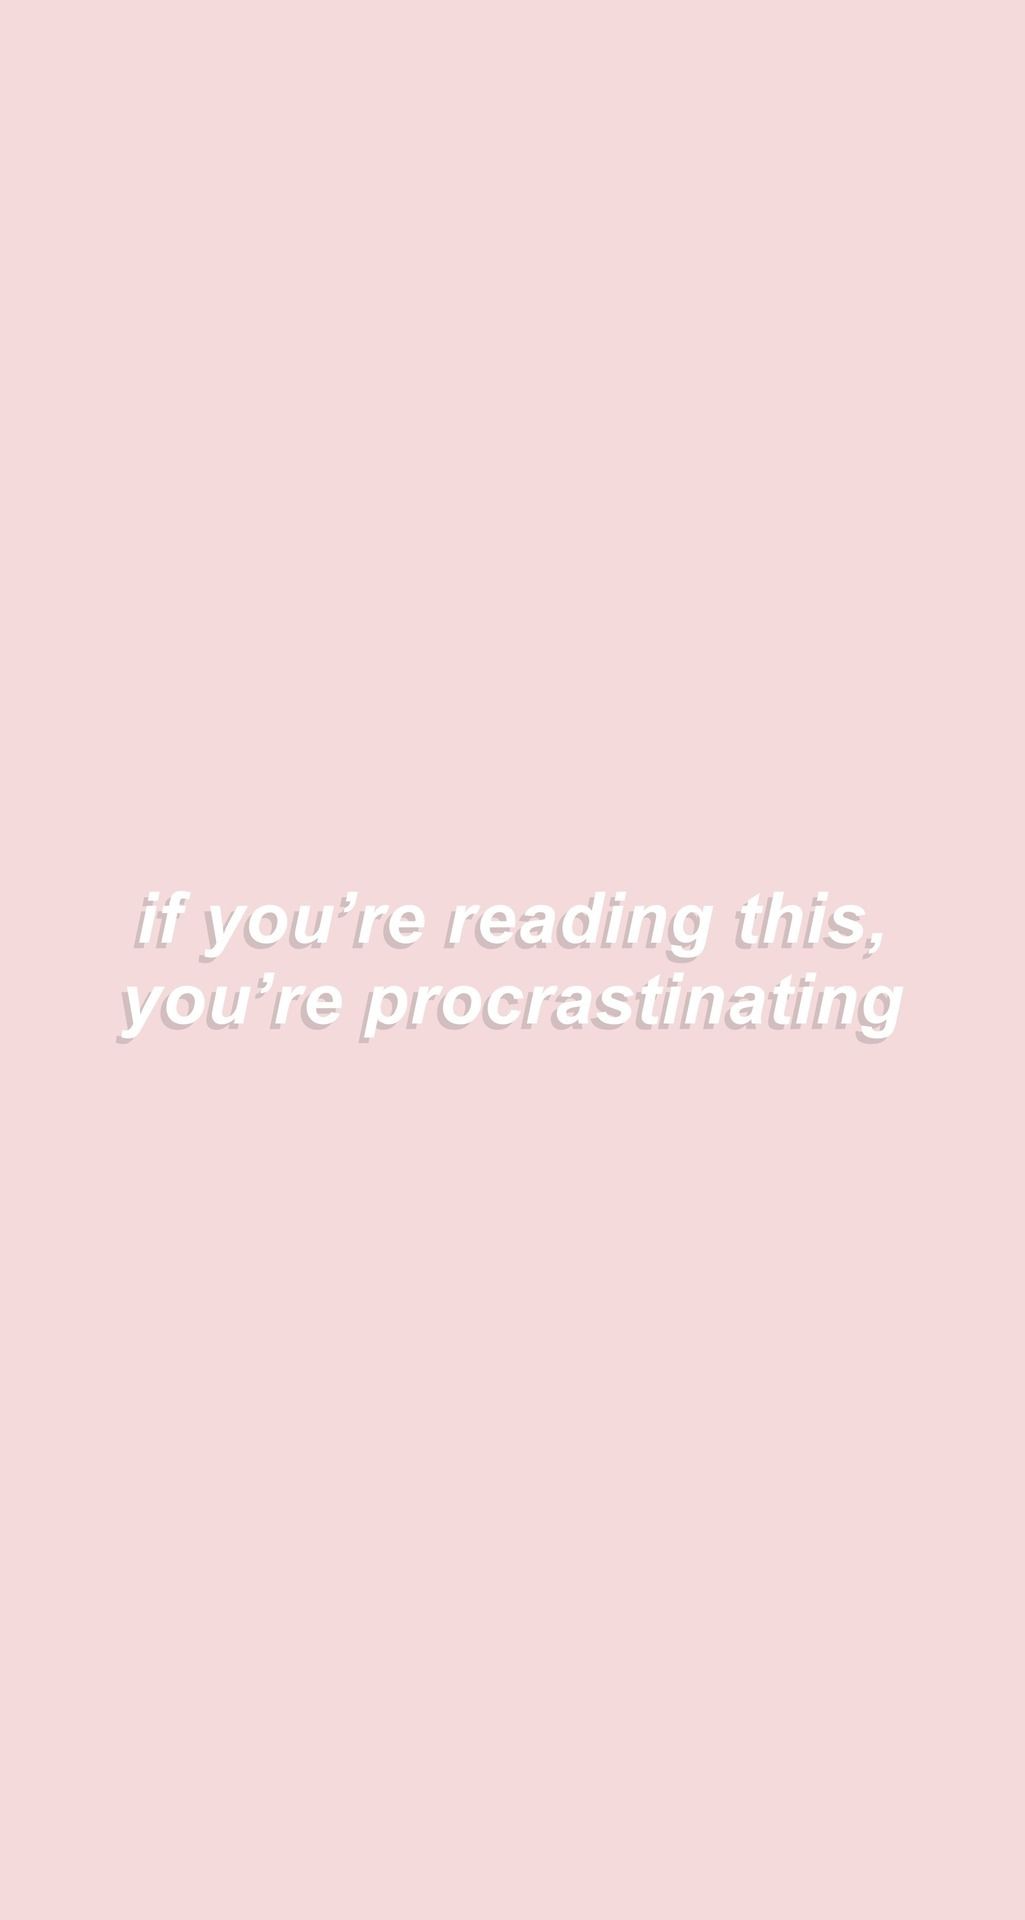 If you're reading this, you're procrastinating - Study, school